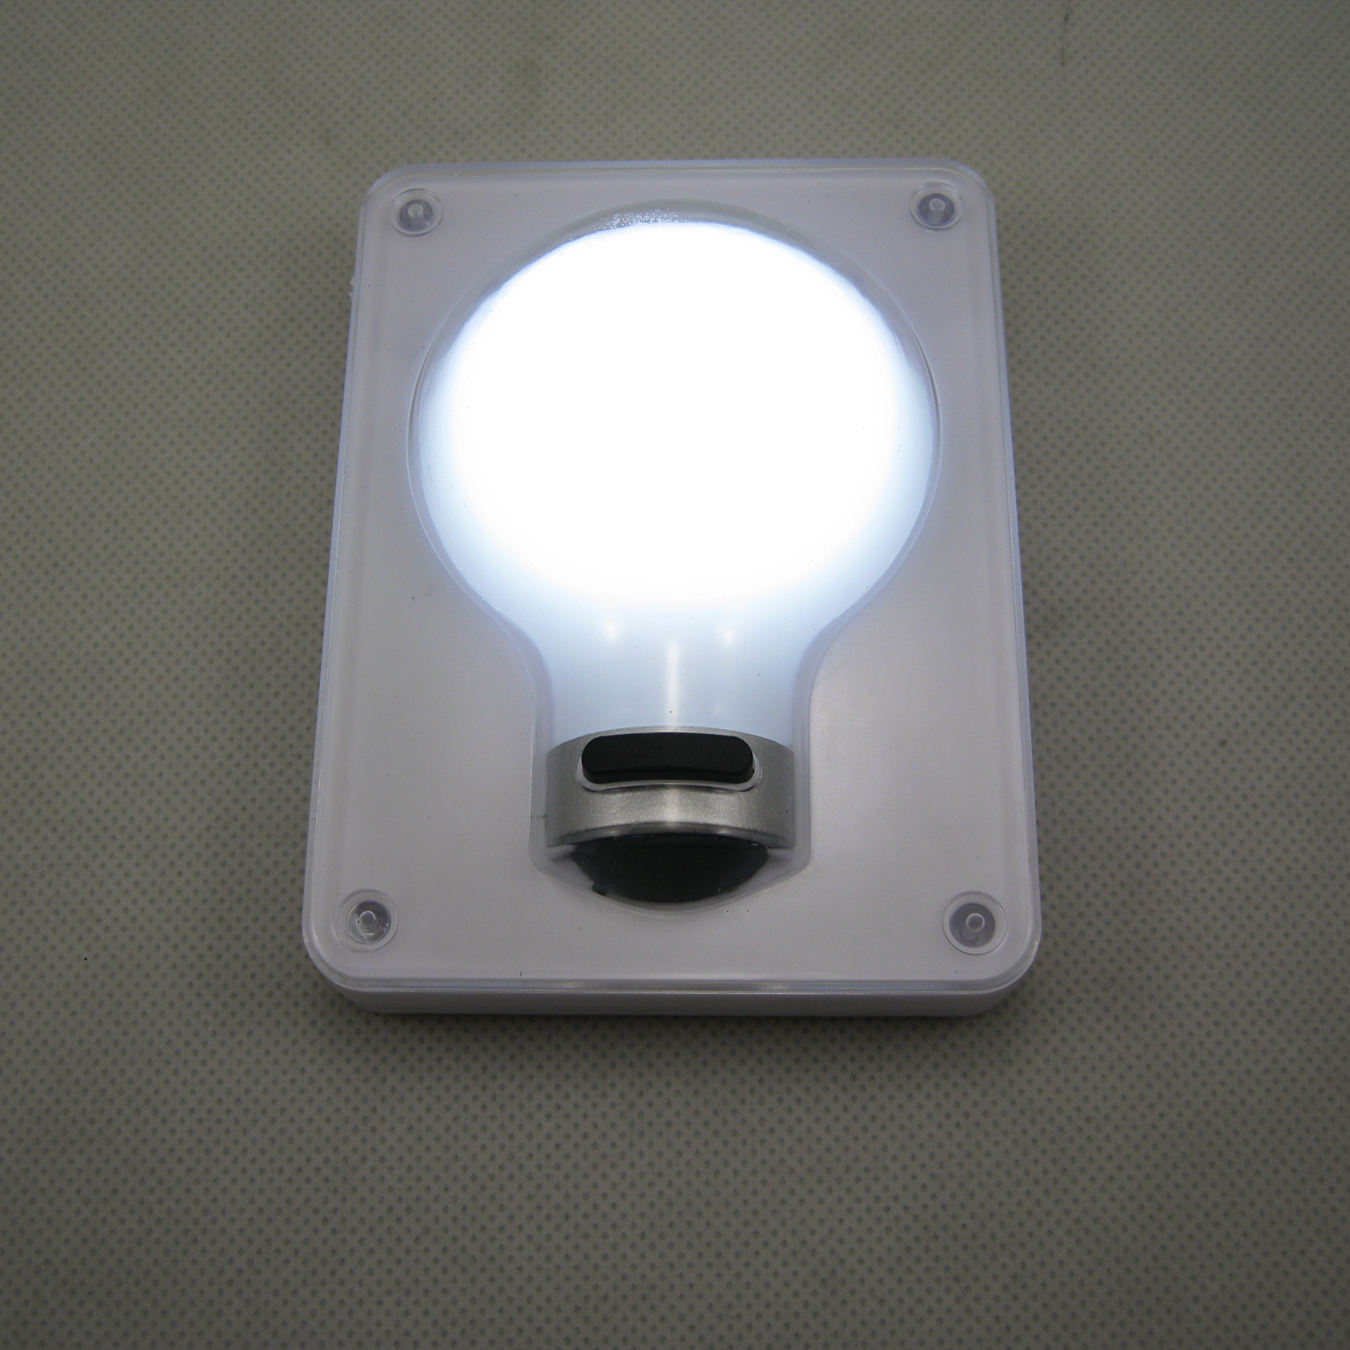 Battery operated wall mounted 4 COB LED bulb type cordless switch night light 